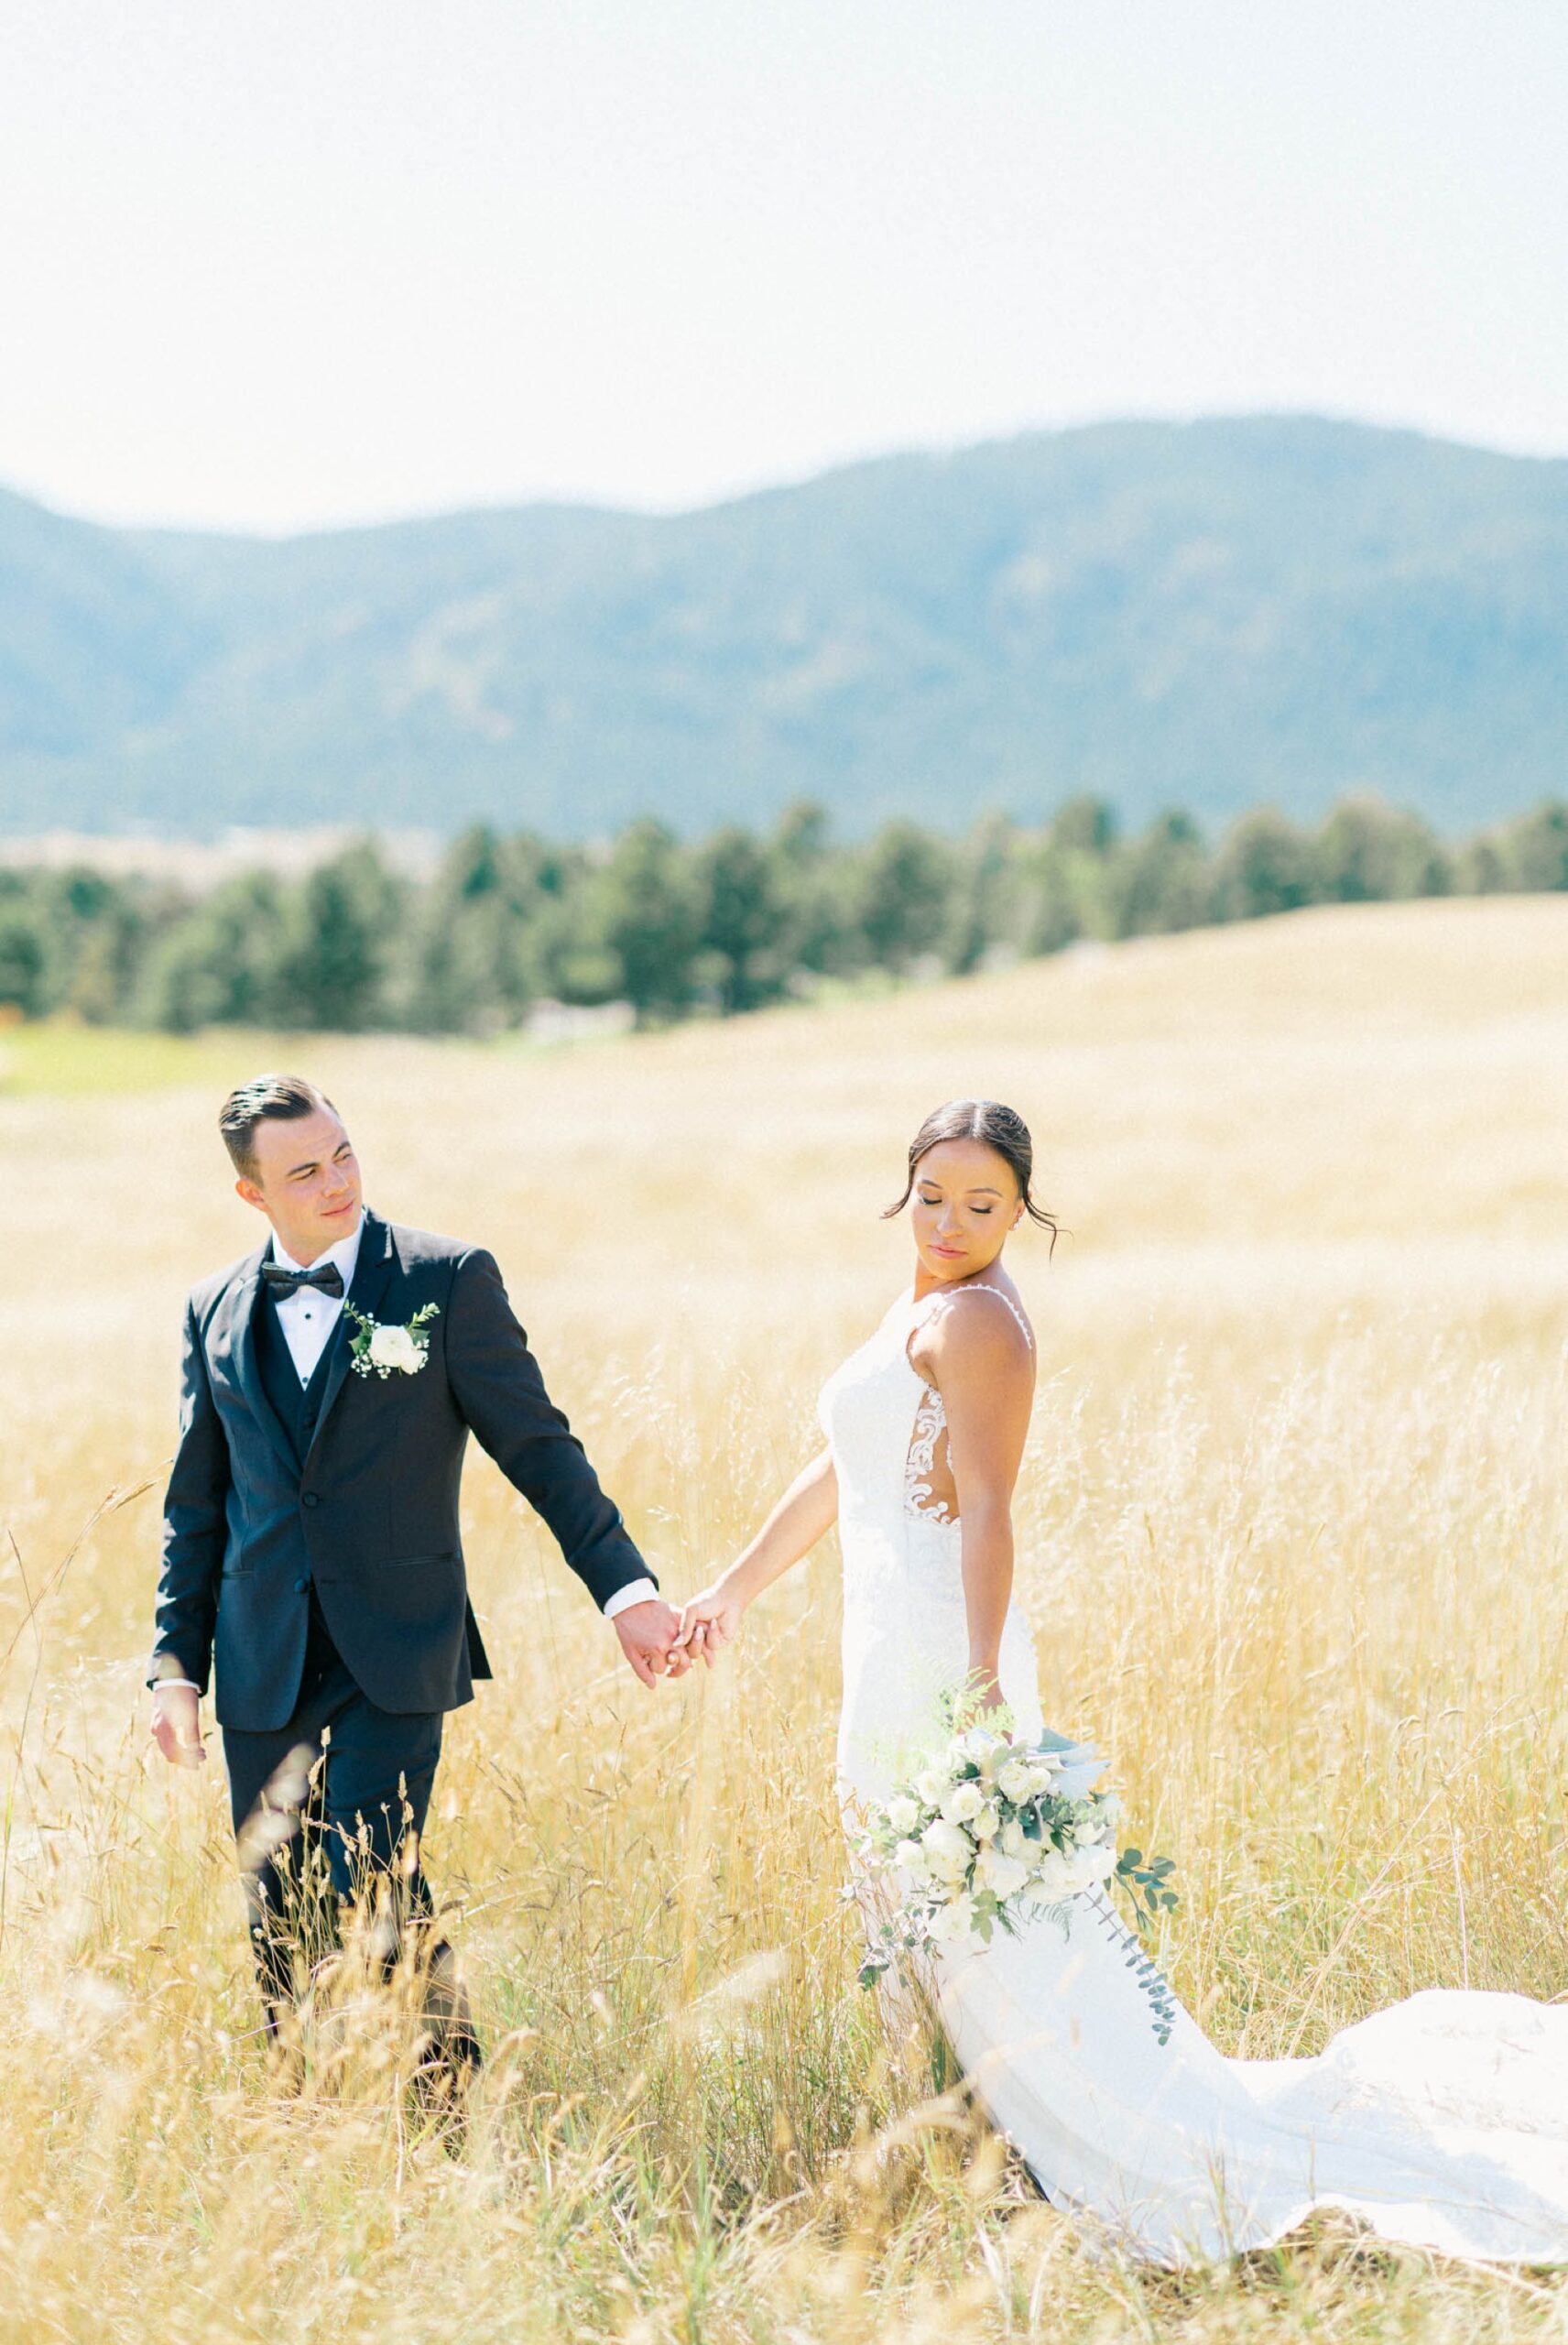 Spruce Mountains Events photo of a bride and groom in field